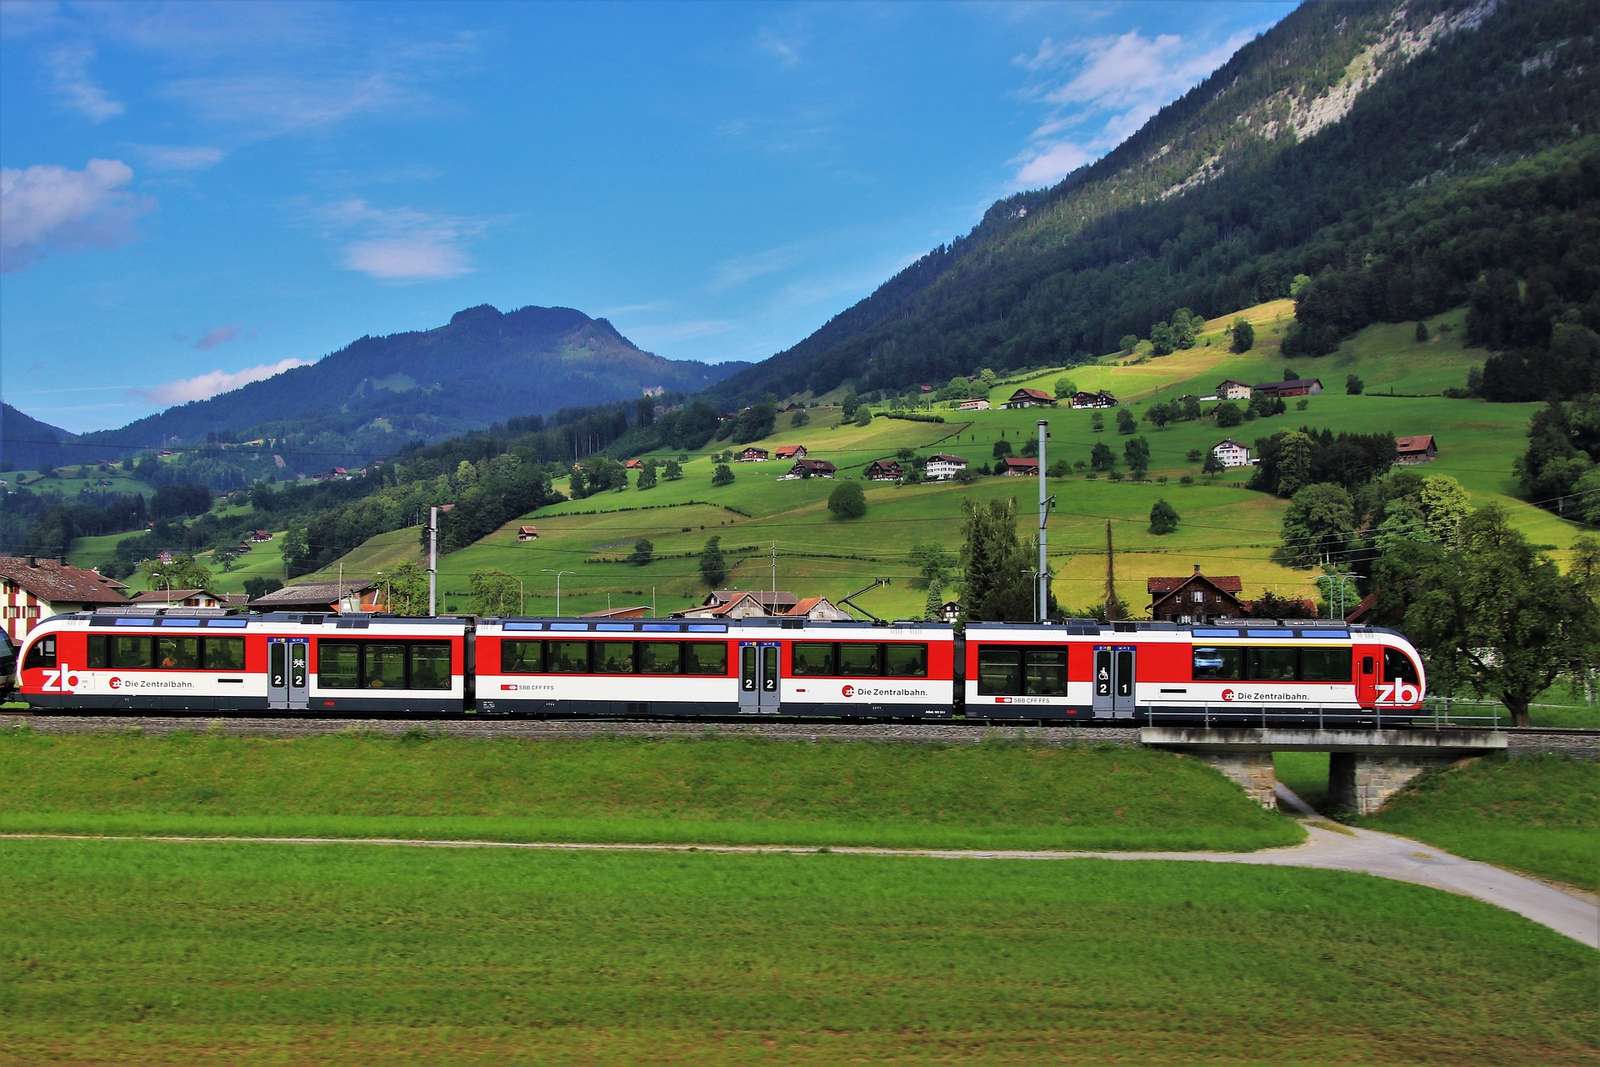 Train in the mountains jigsaw puzzle online